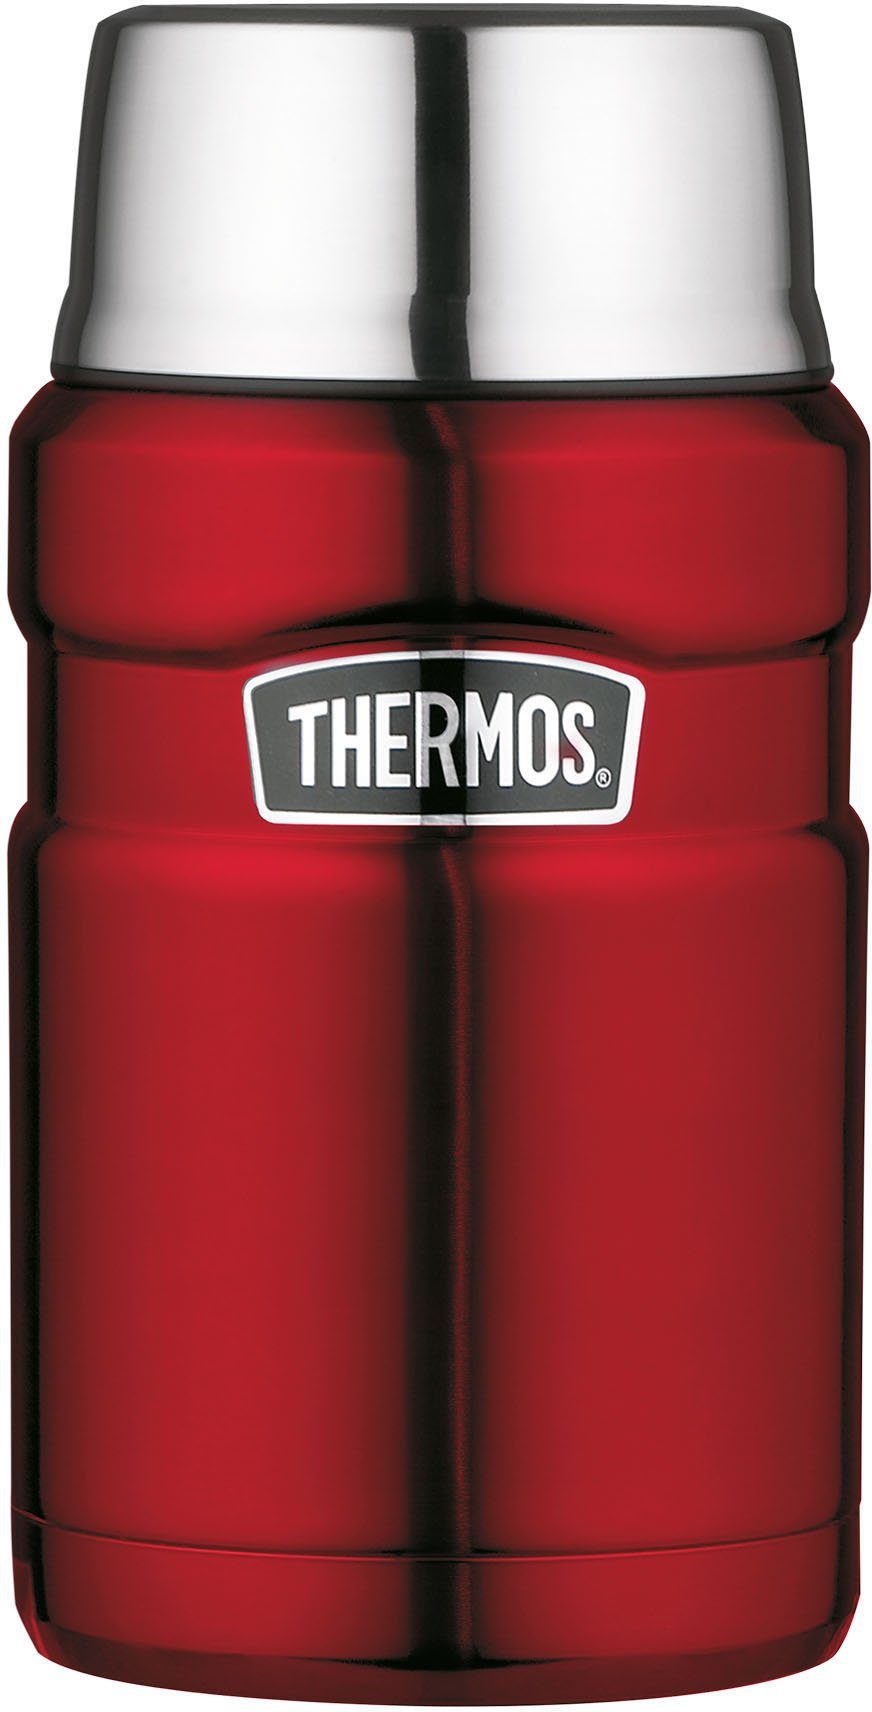 THERMOS Thermobehälter Stainless King, ml (1-tlg), rot Edelstahl, 710